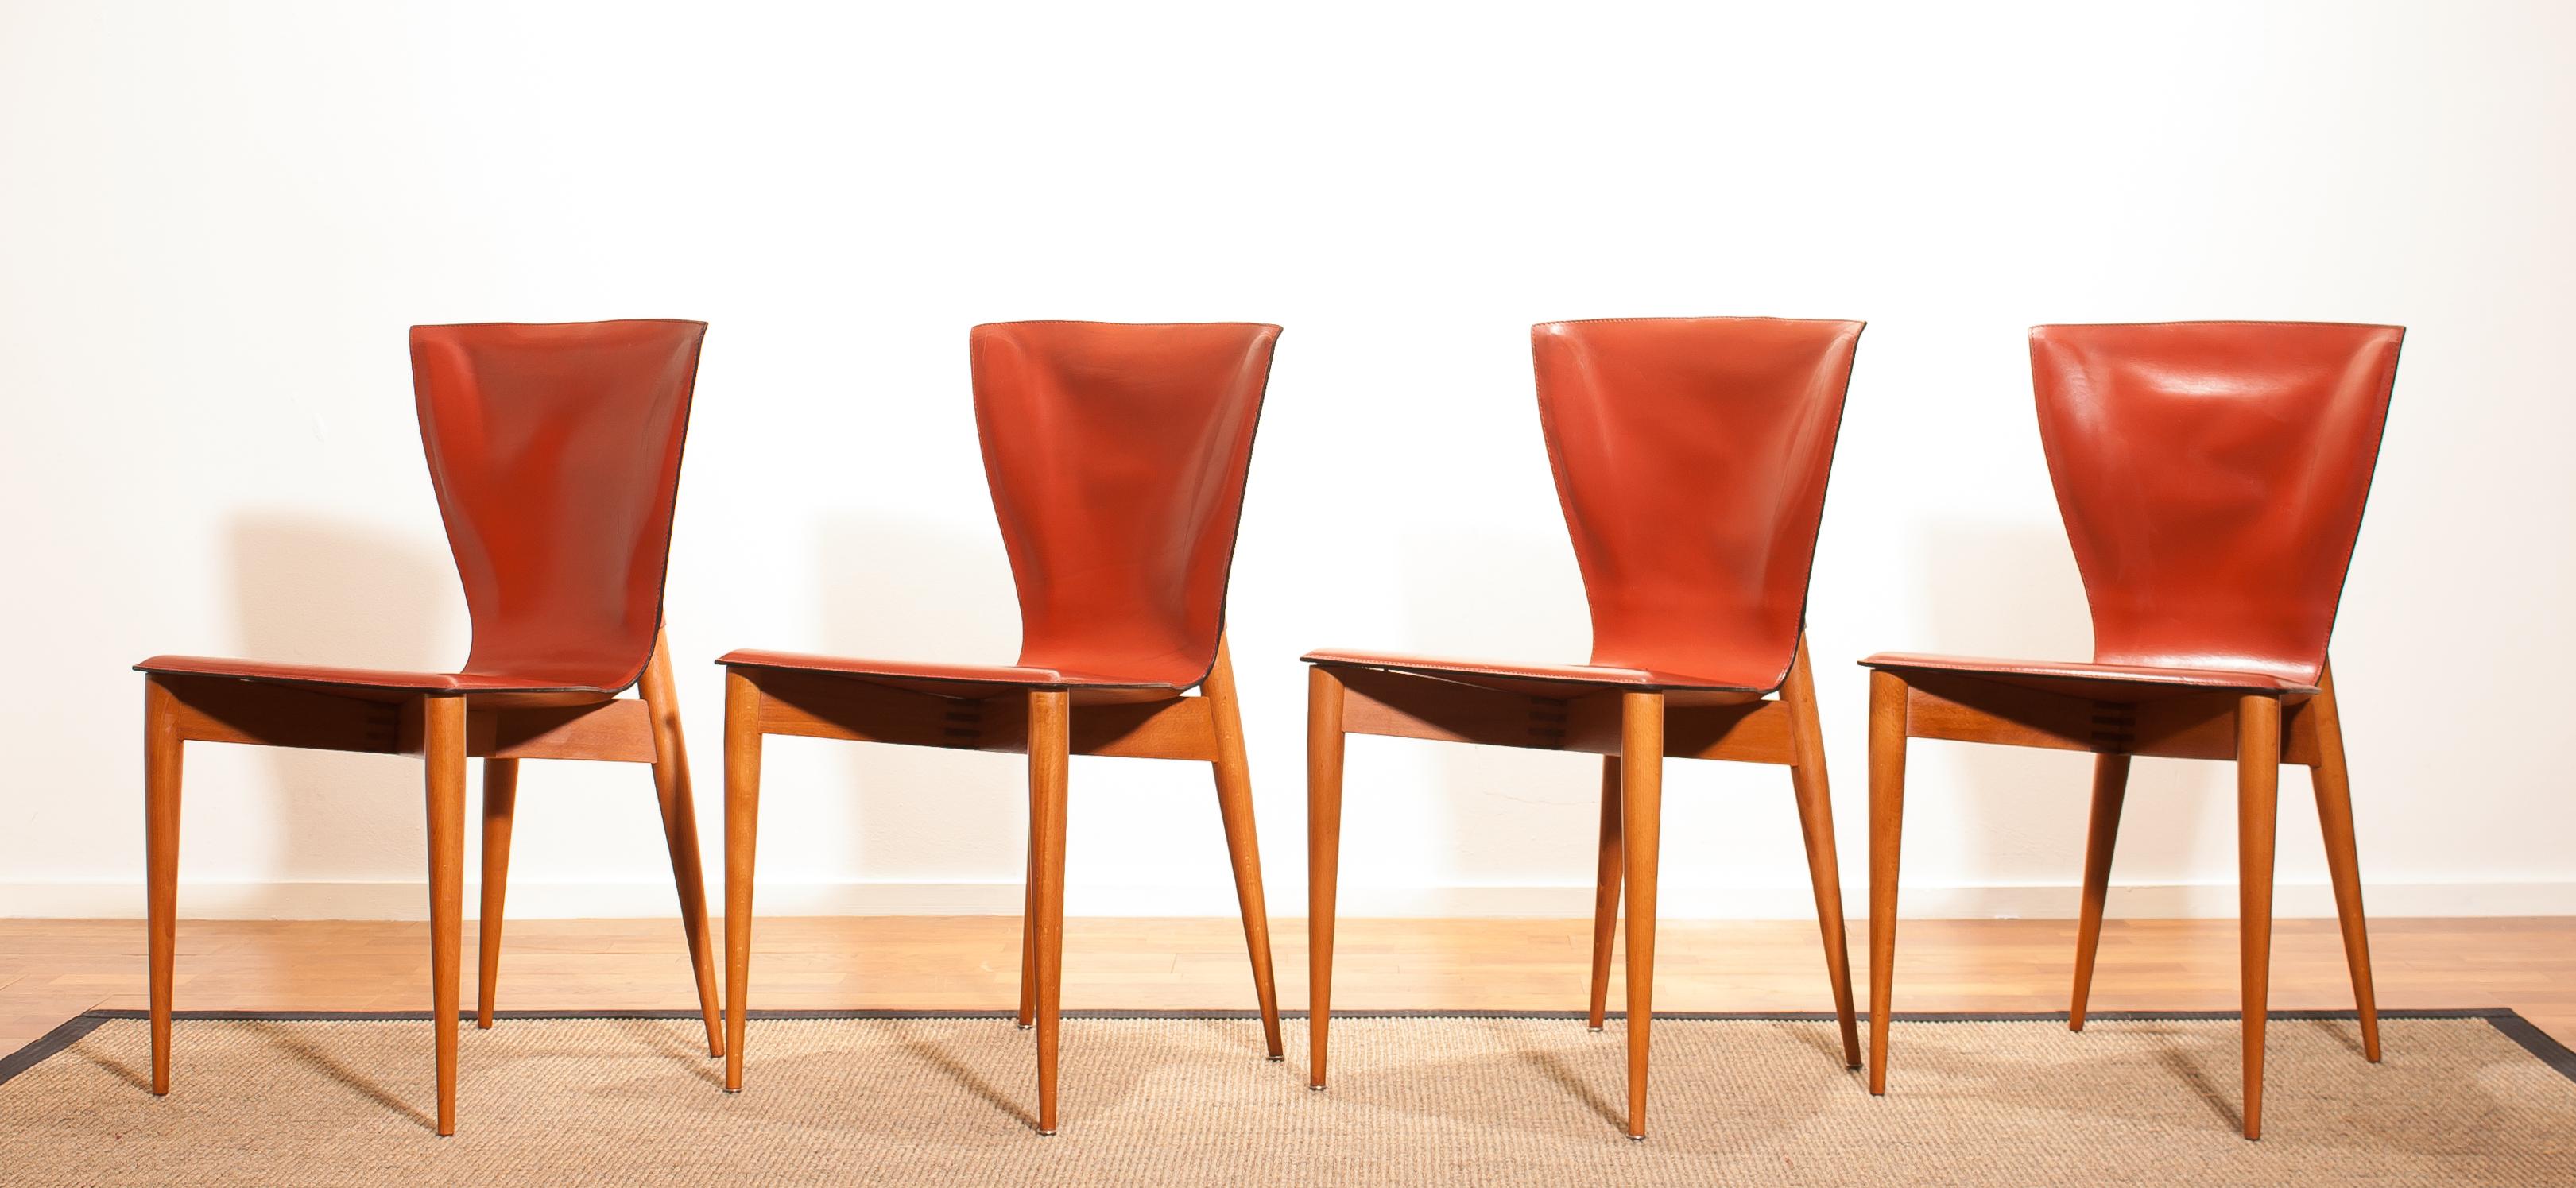 This set of four Mid-Century Modern chairs were designed by Carlo Bartoli and made by Matteo Grassi.
They are made of hardwood frames with cognac brown Italian leather seats and backs.
The set is in a wonderful condition.
Period,